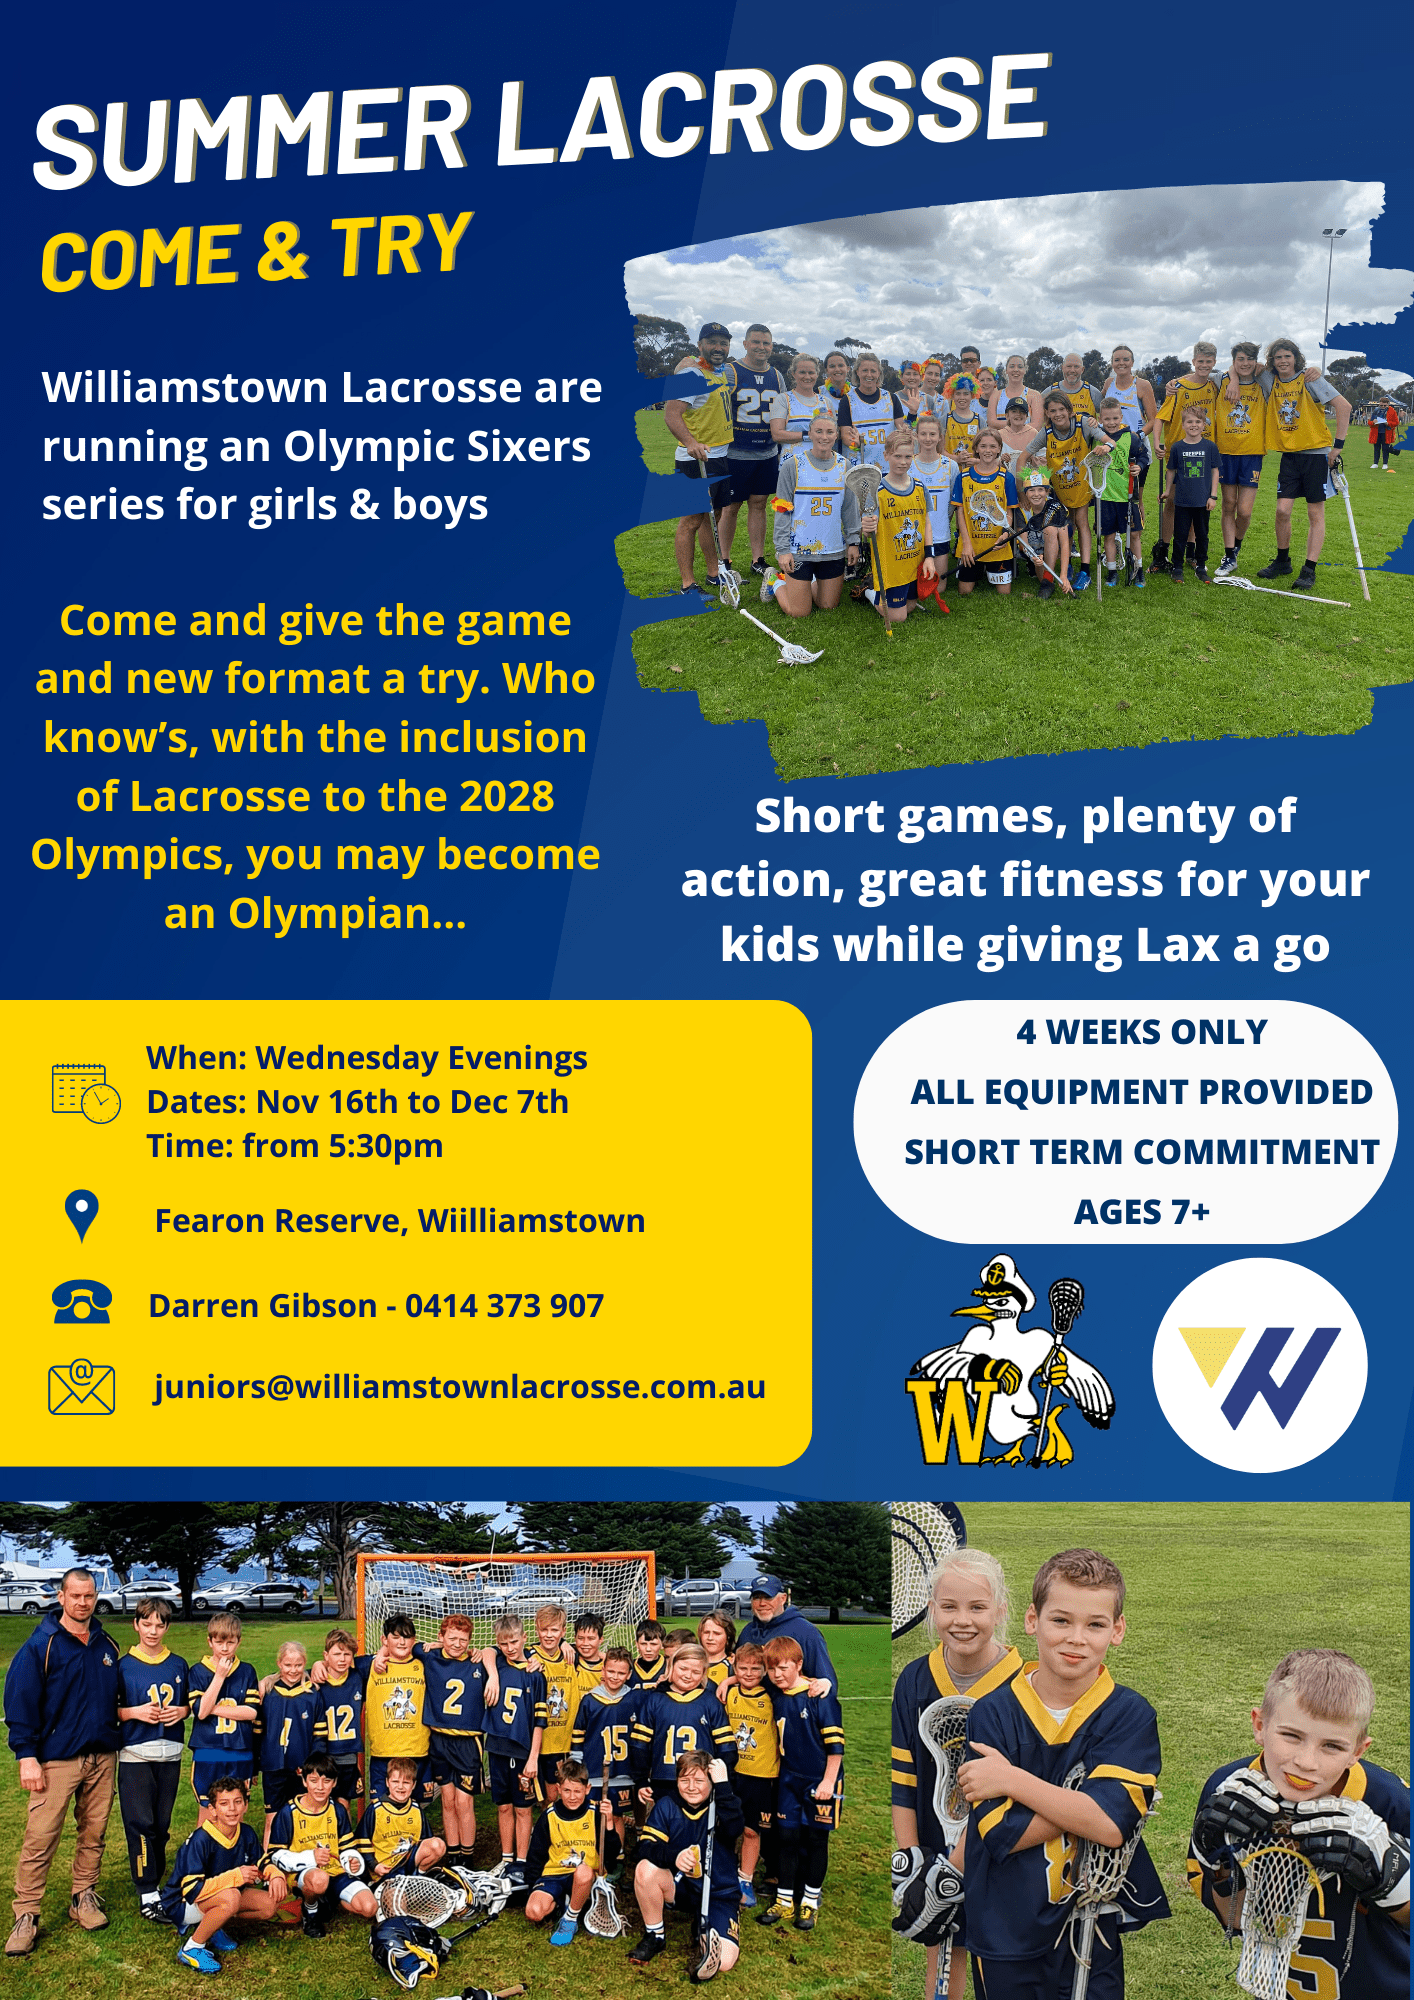 Summer Lacrosse Come & Try